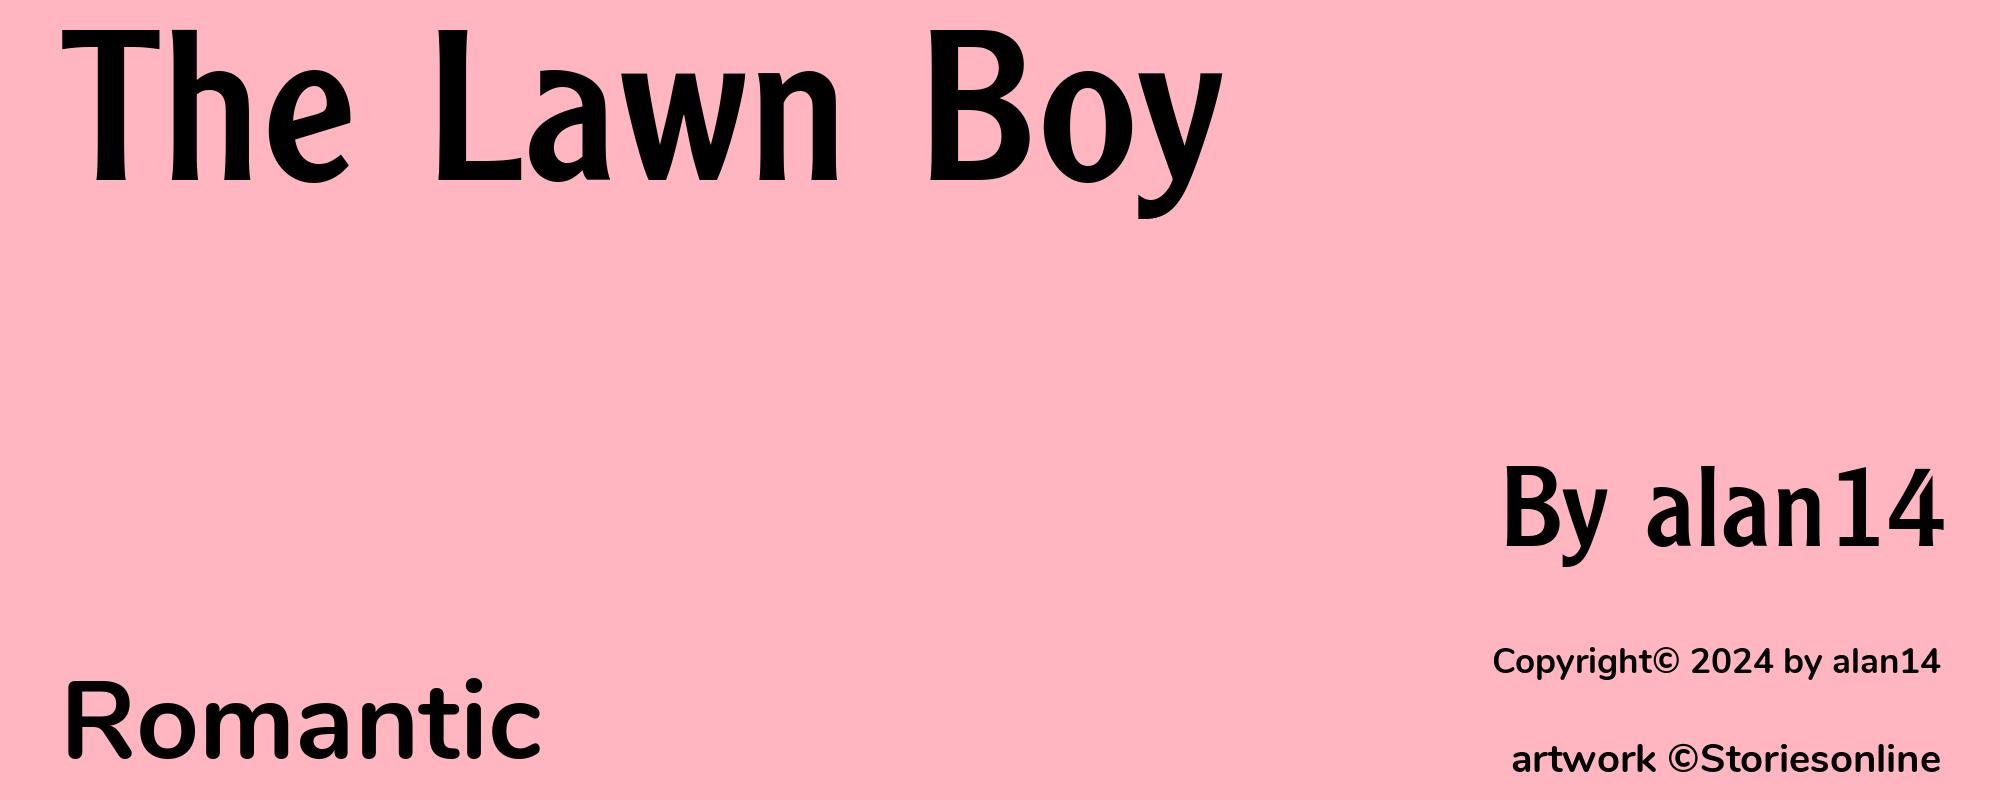 The Lawn Boy - Cover